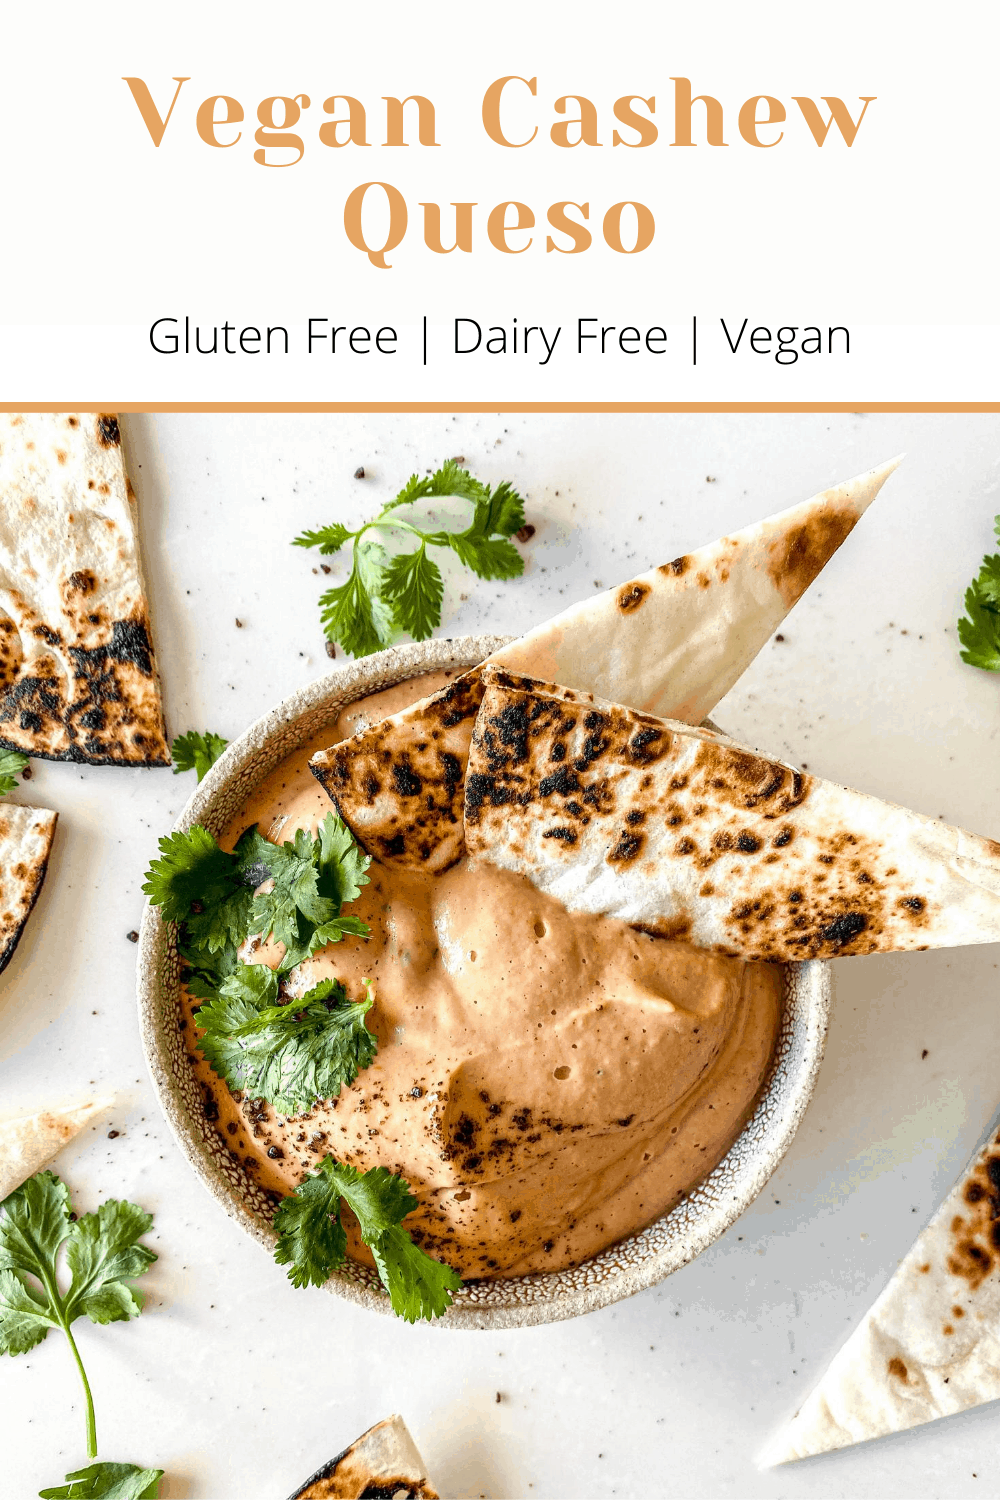 This queso is the easiest non-dairy Mexican cheese sauce! It's only a handful of ingredients, vegan, and SO delicious! It's a crowd pleaser for sure!! thetoastedpinenut.com #thetoastedpinenut #queso #cashewqueso #veganqueso #dairyfreequeso